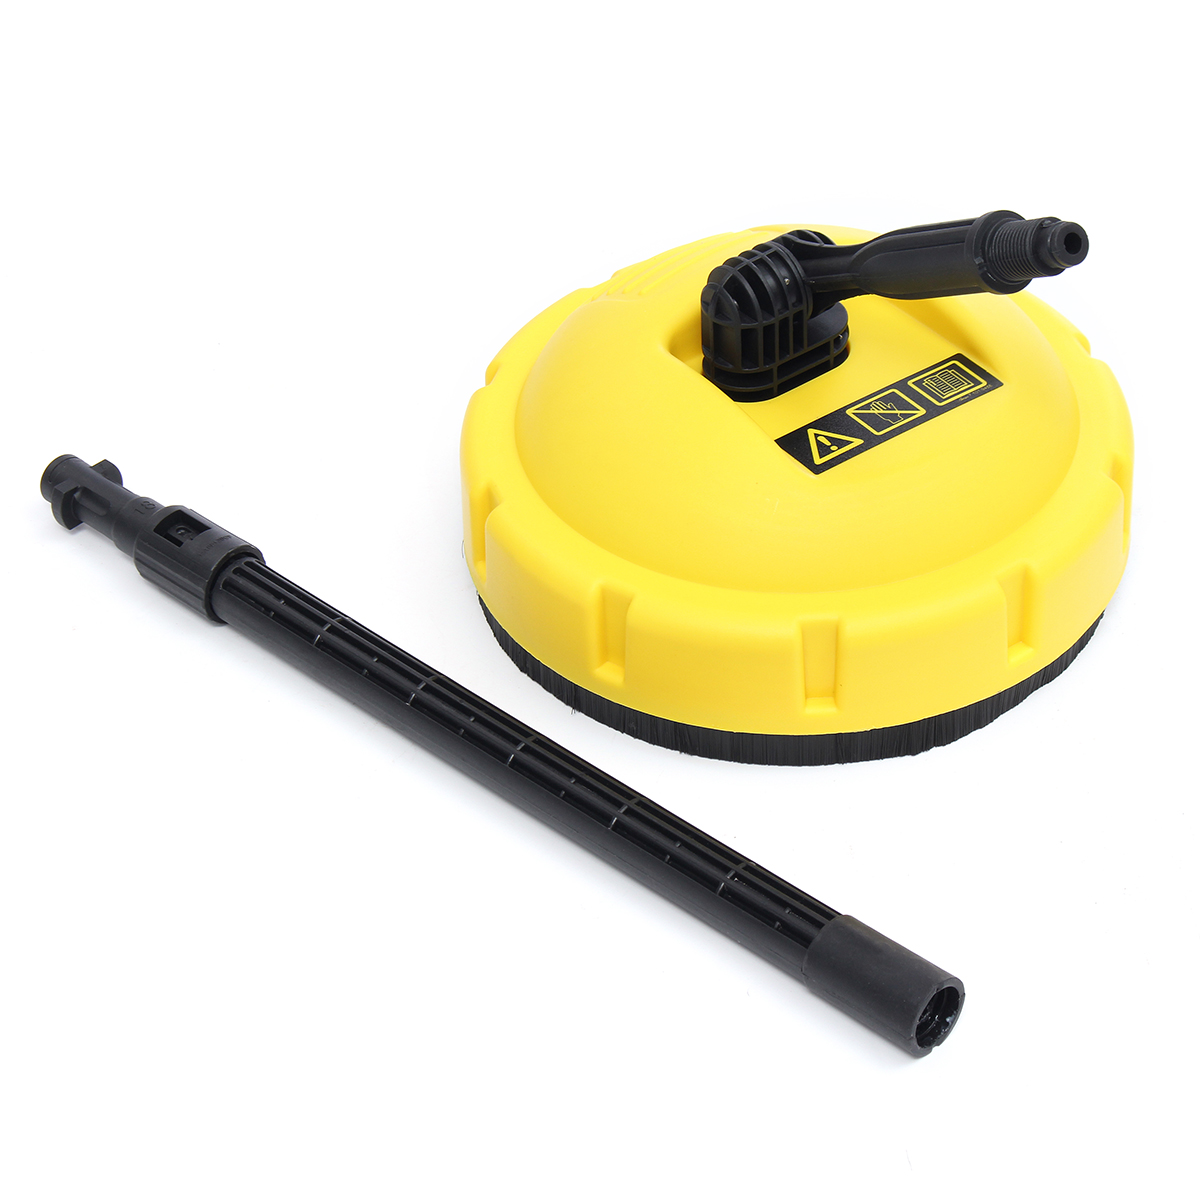 Pressure-Washer-Rotary-Surface-Patio-Cleaner-Floor-Brushing-Washing-Tool-For-Karcher-LAVOR-1330987-2